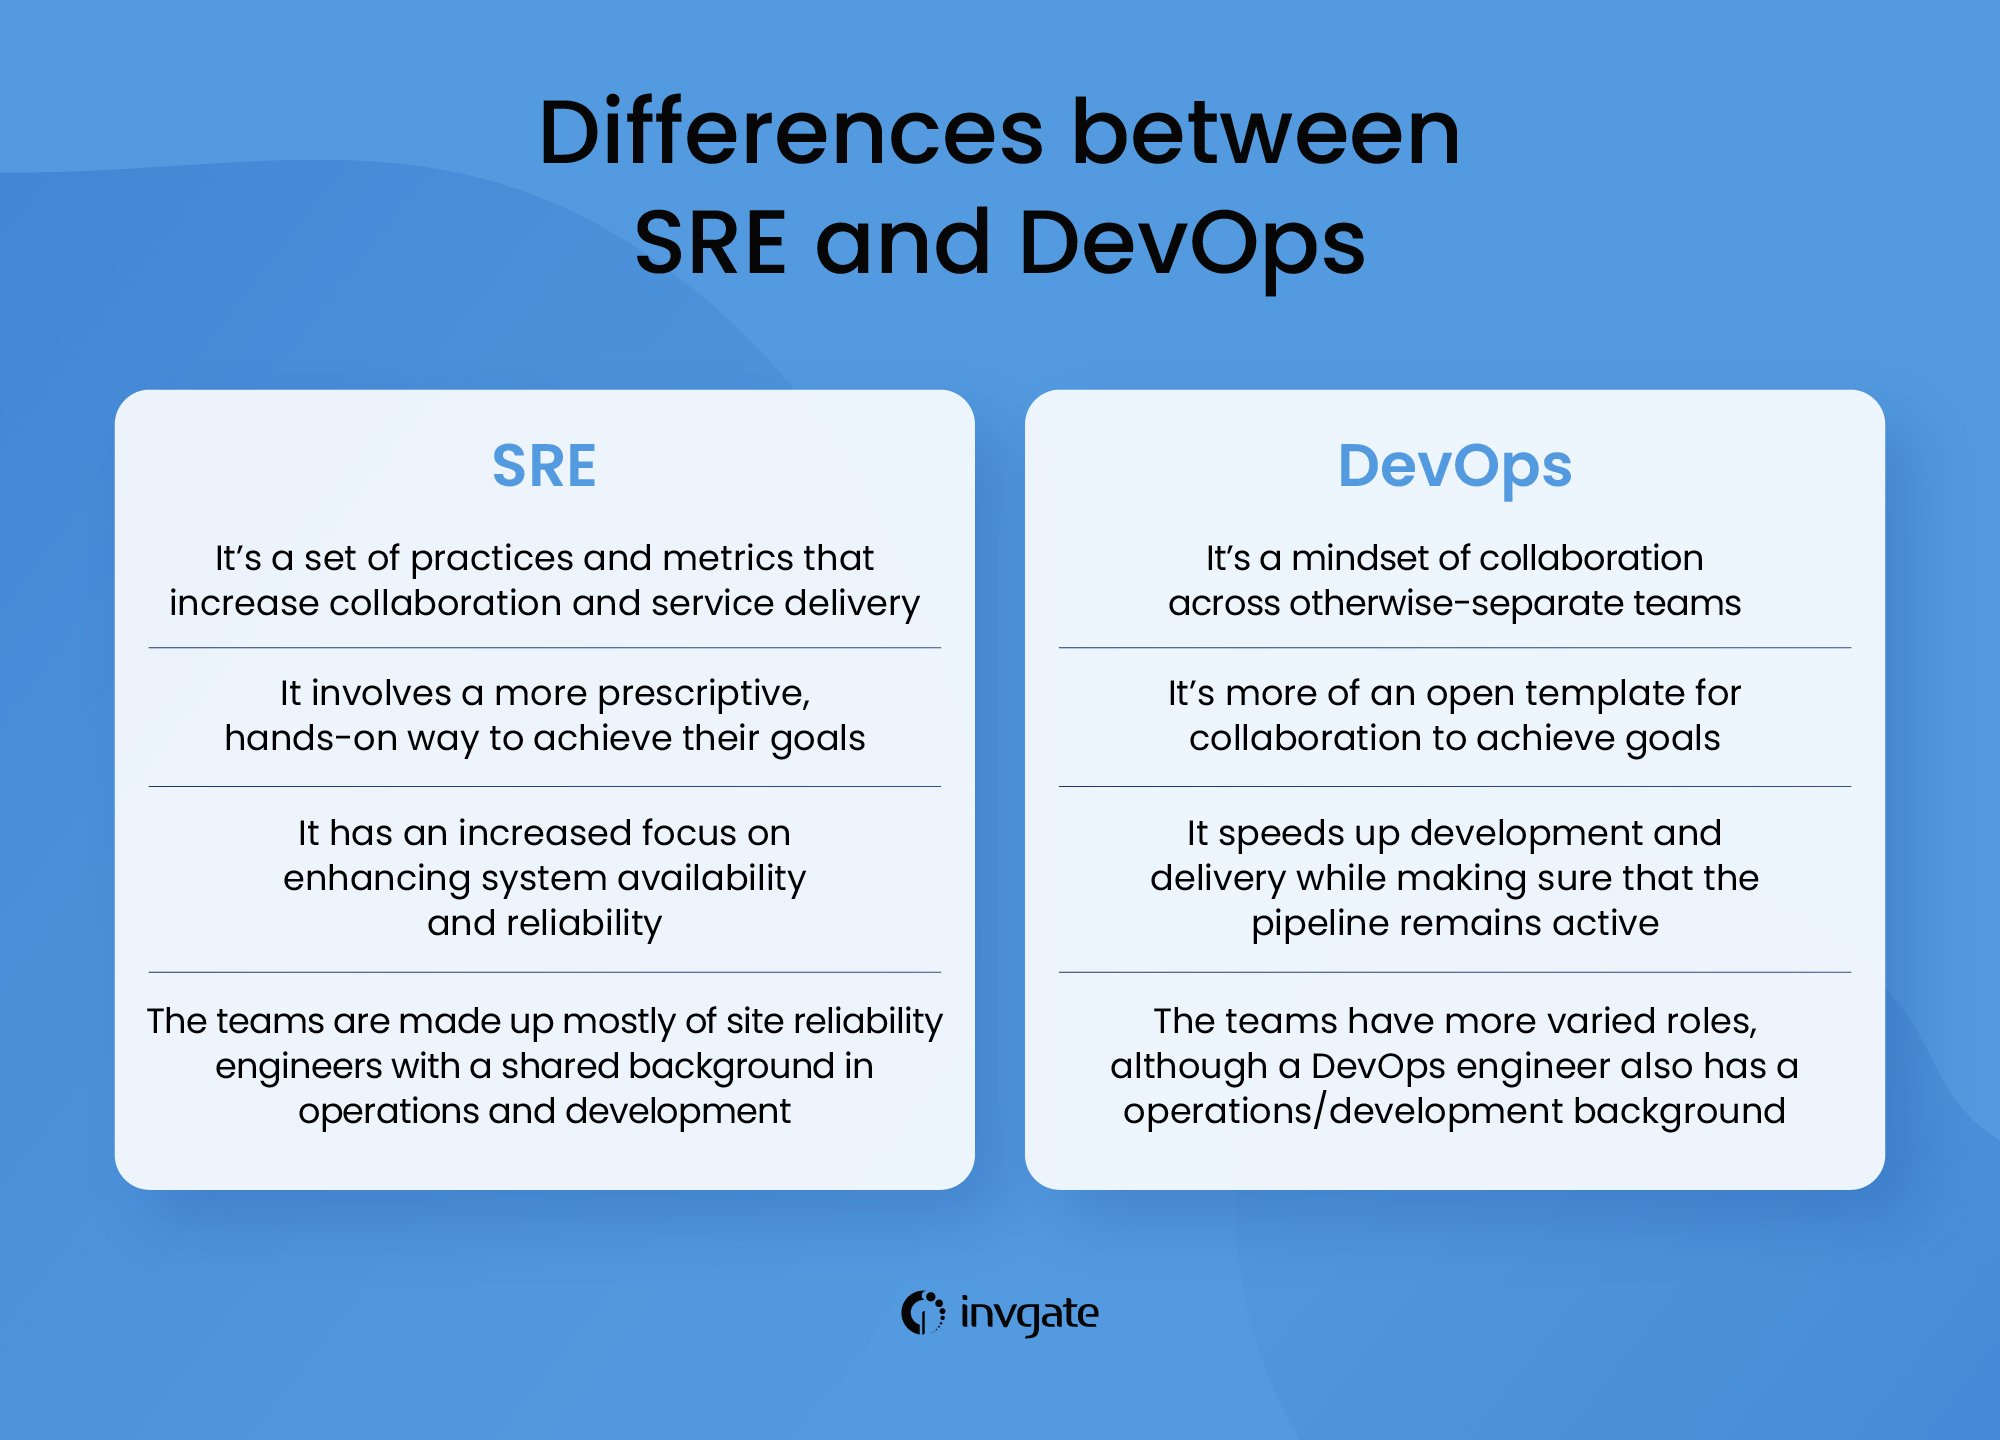 DevOps and SRE both enhance the software development and product release cycle but they are also different in other ways